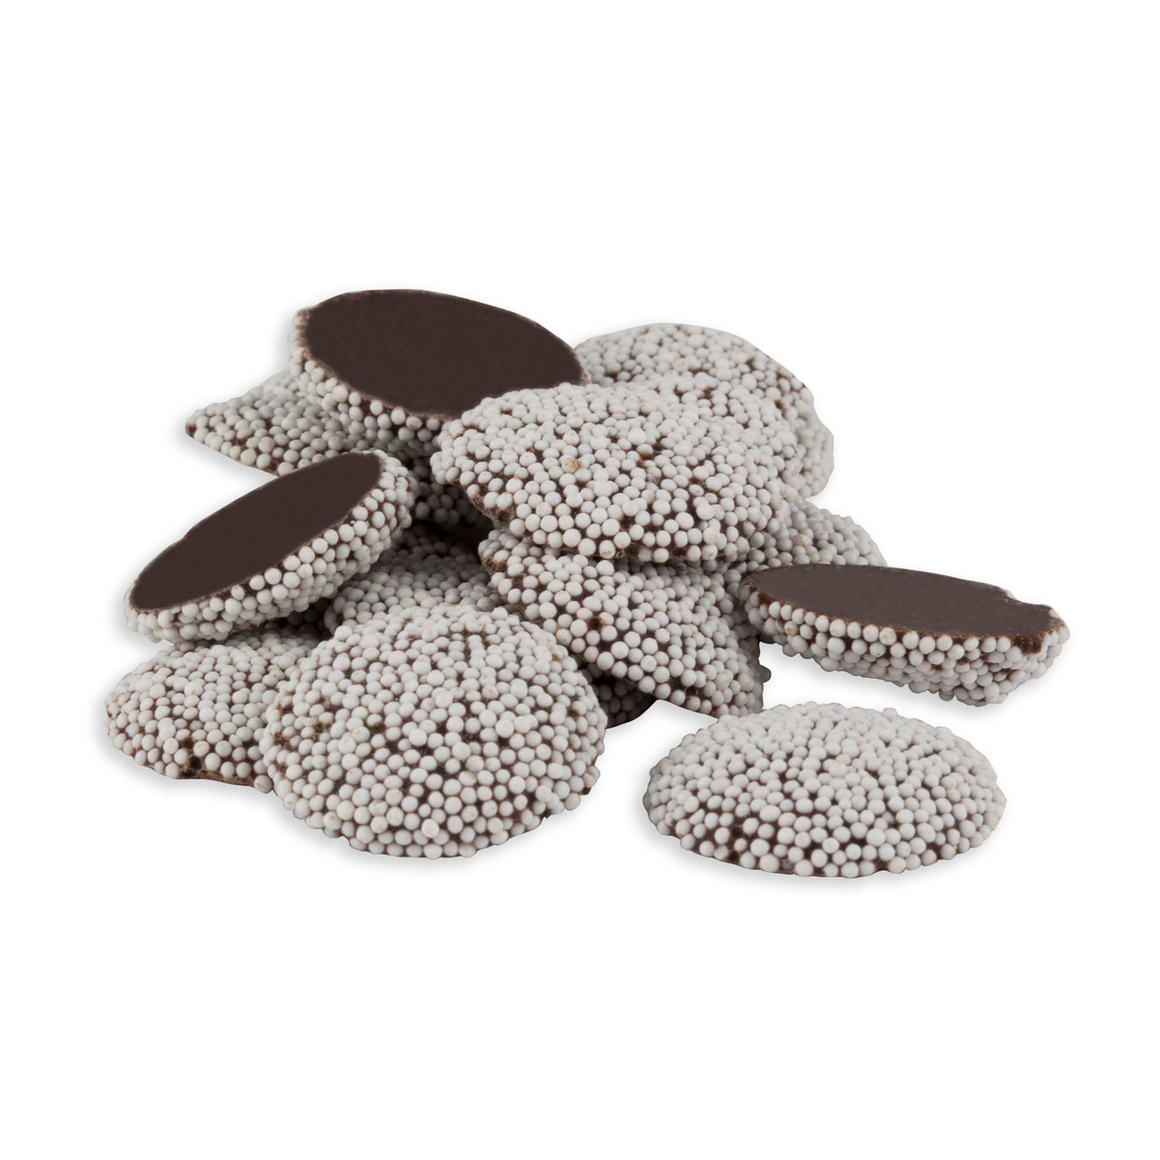 All City Candy Dark Chocolate Maxi Nonpareils - 3 LB Bulk Bag Bulk Unwrapped Kargher Chocolates For fresh candy and great service, visit www.allcitycandy.com